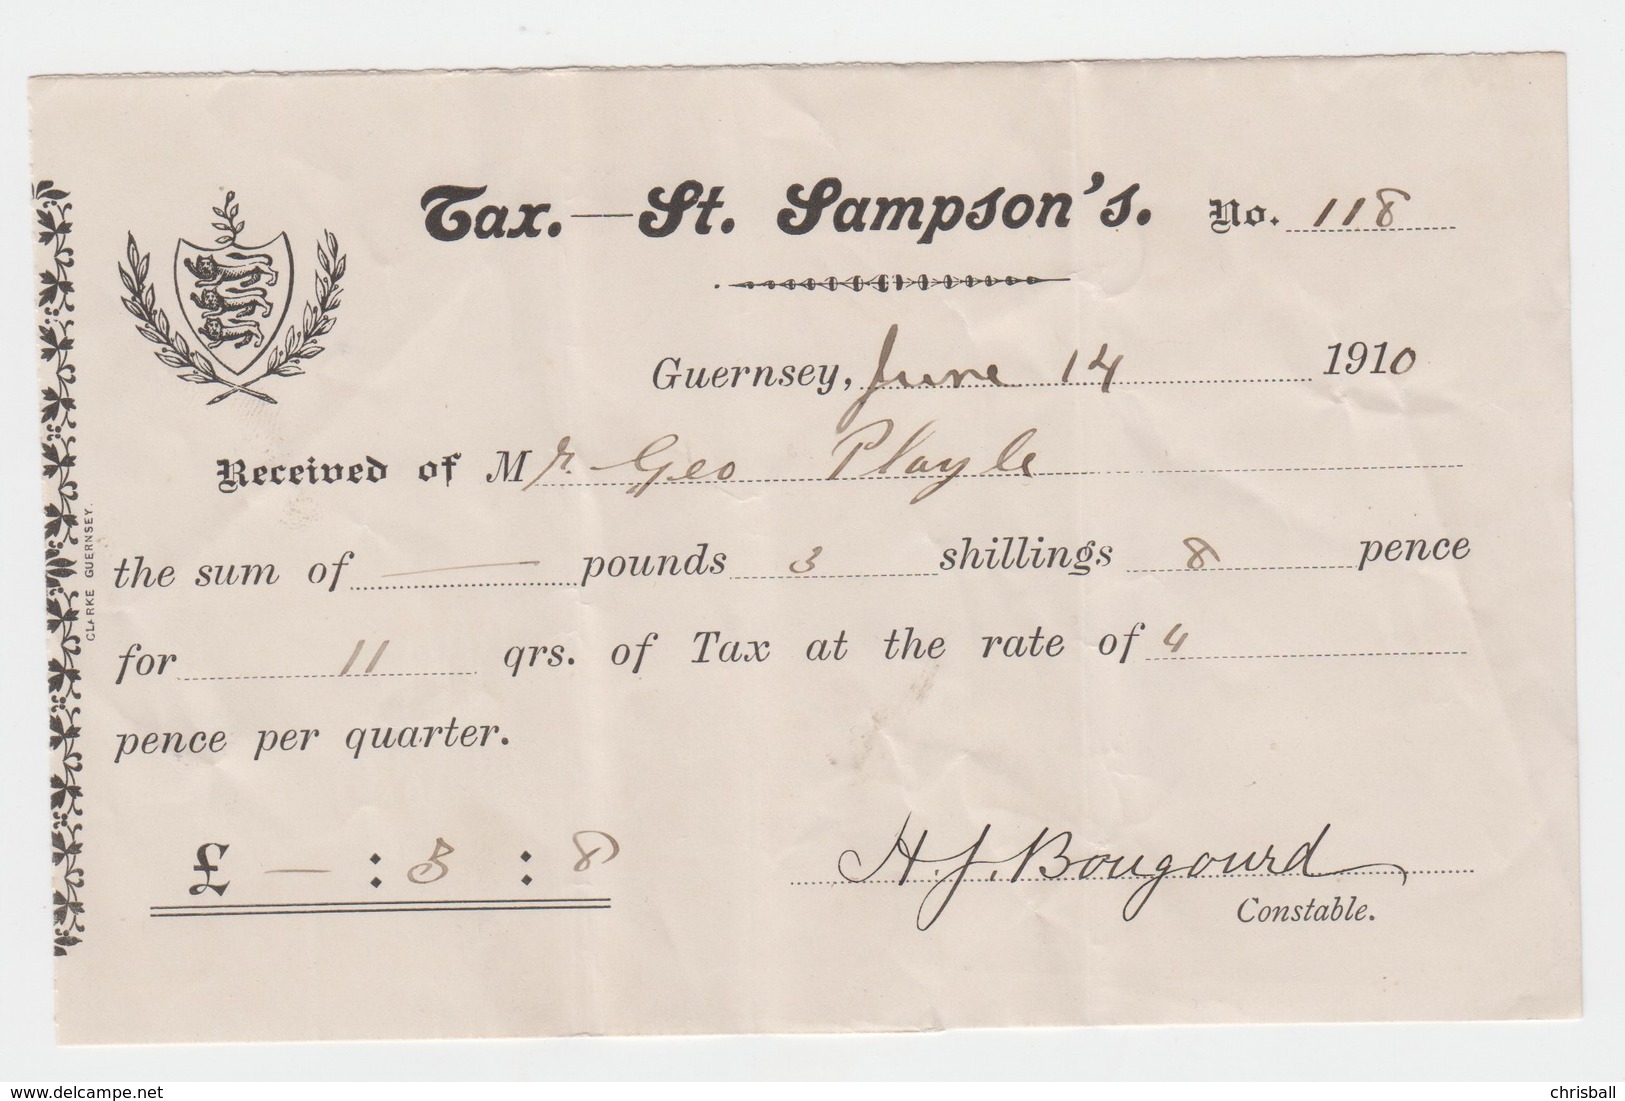 Guernsey - St Sampsons Receipt For Payment Of Rates. June 1910 - United Kingdom